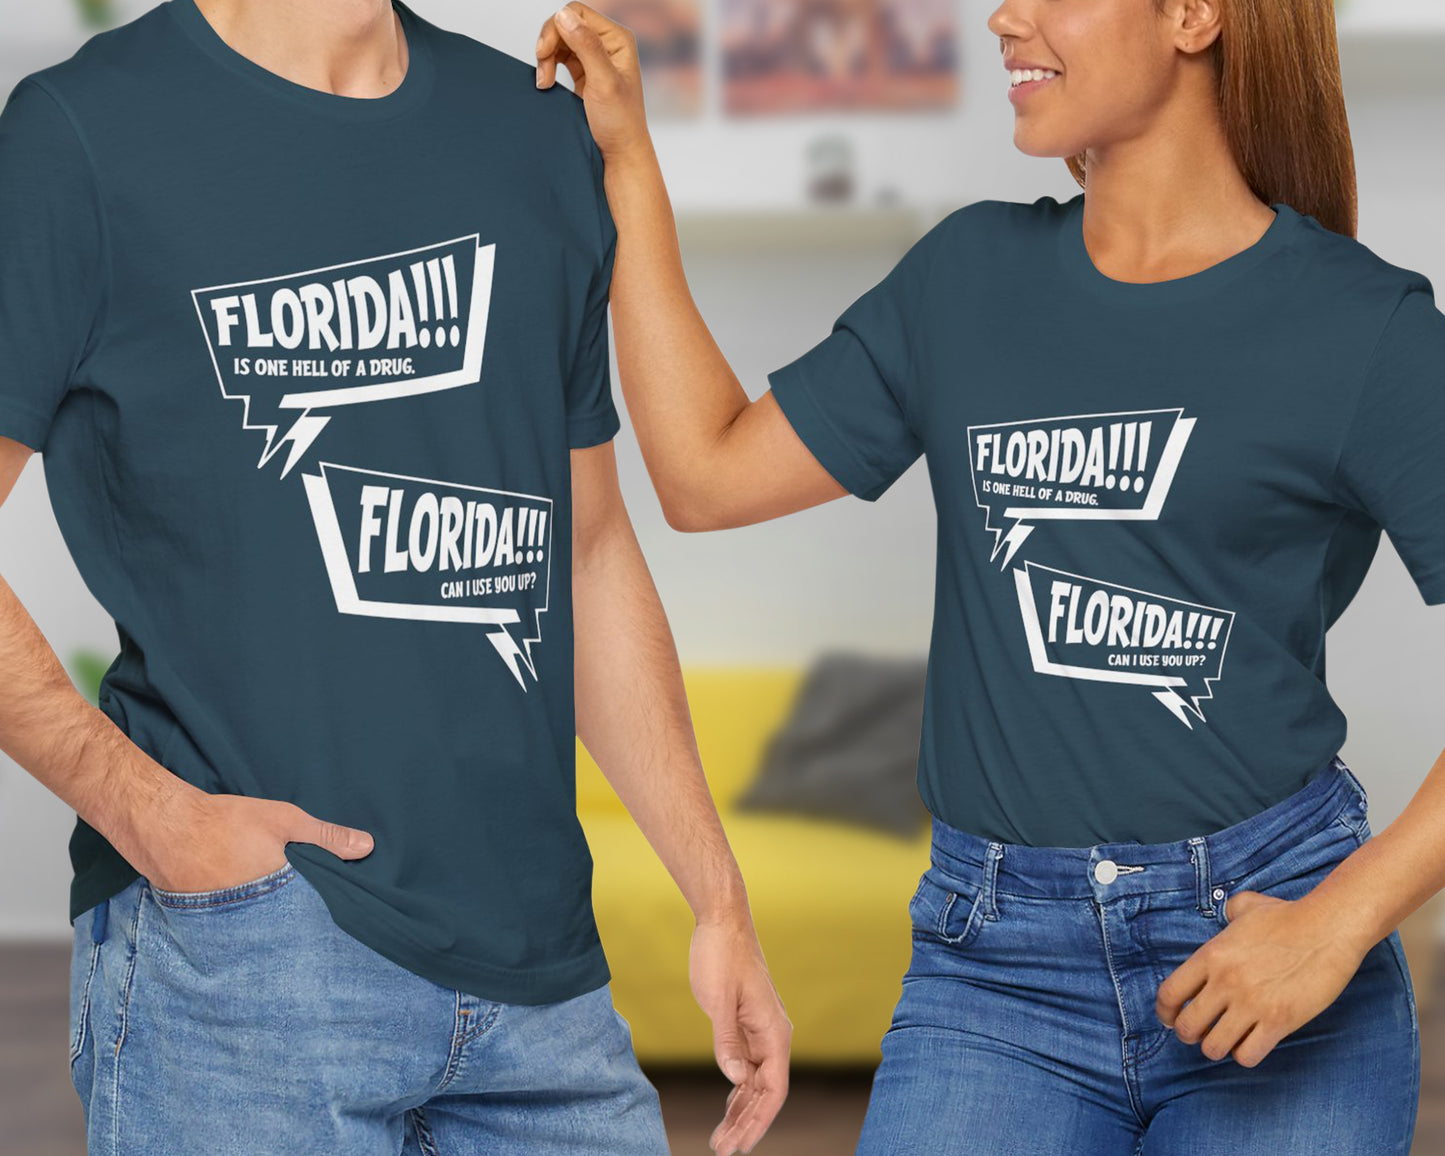 Florida is one hell of a drug, Florida can I use you up? unisex jersey short sleeve t-shirt